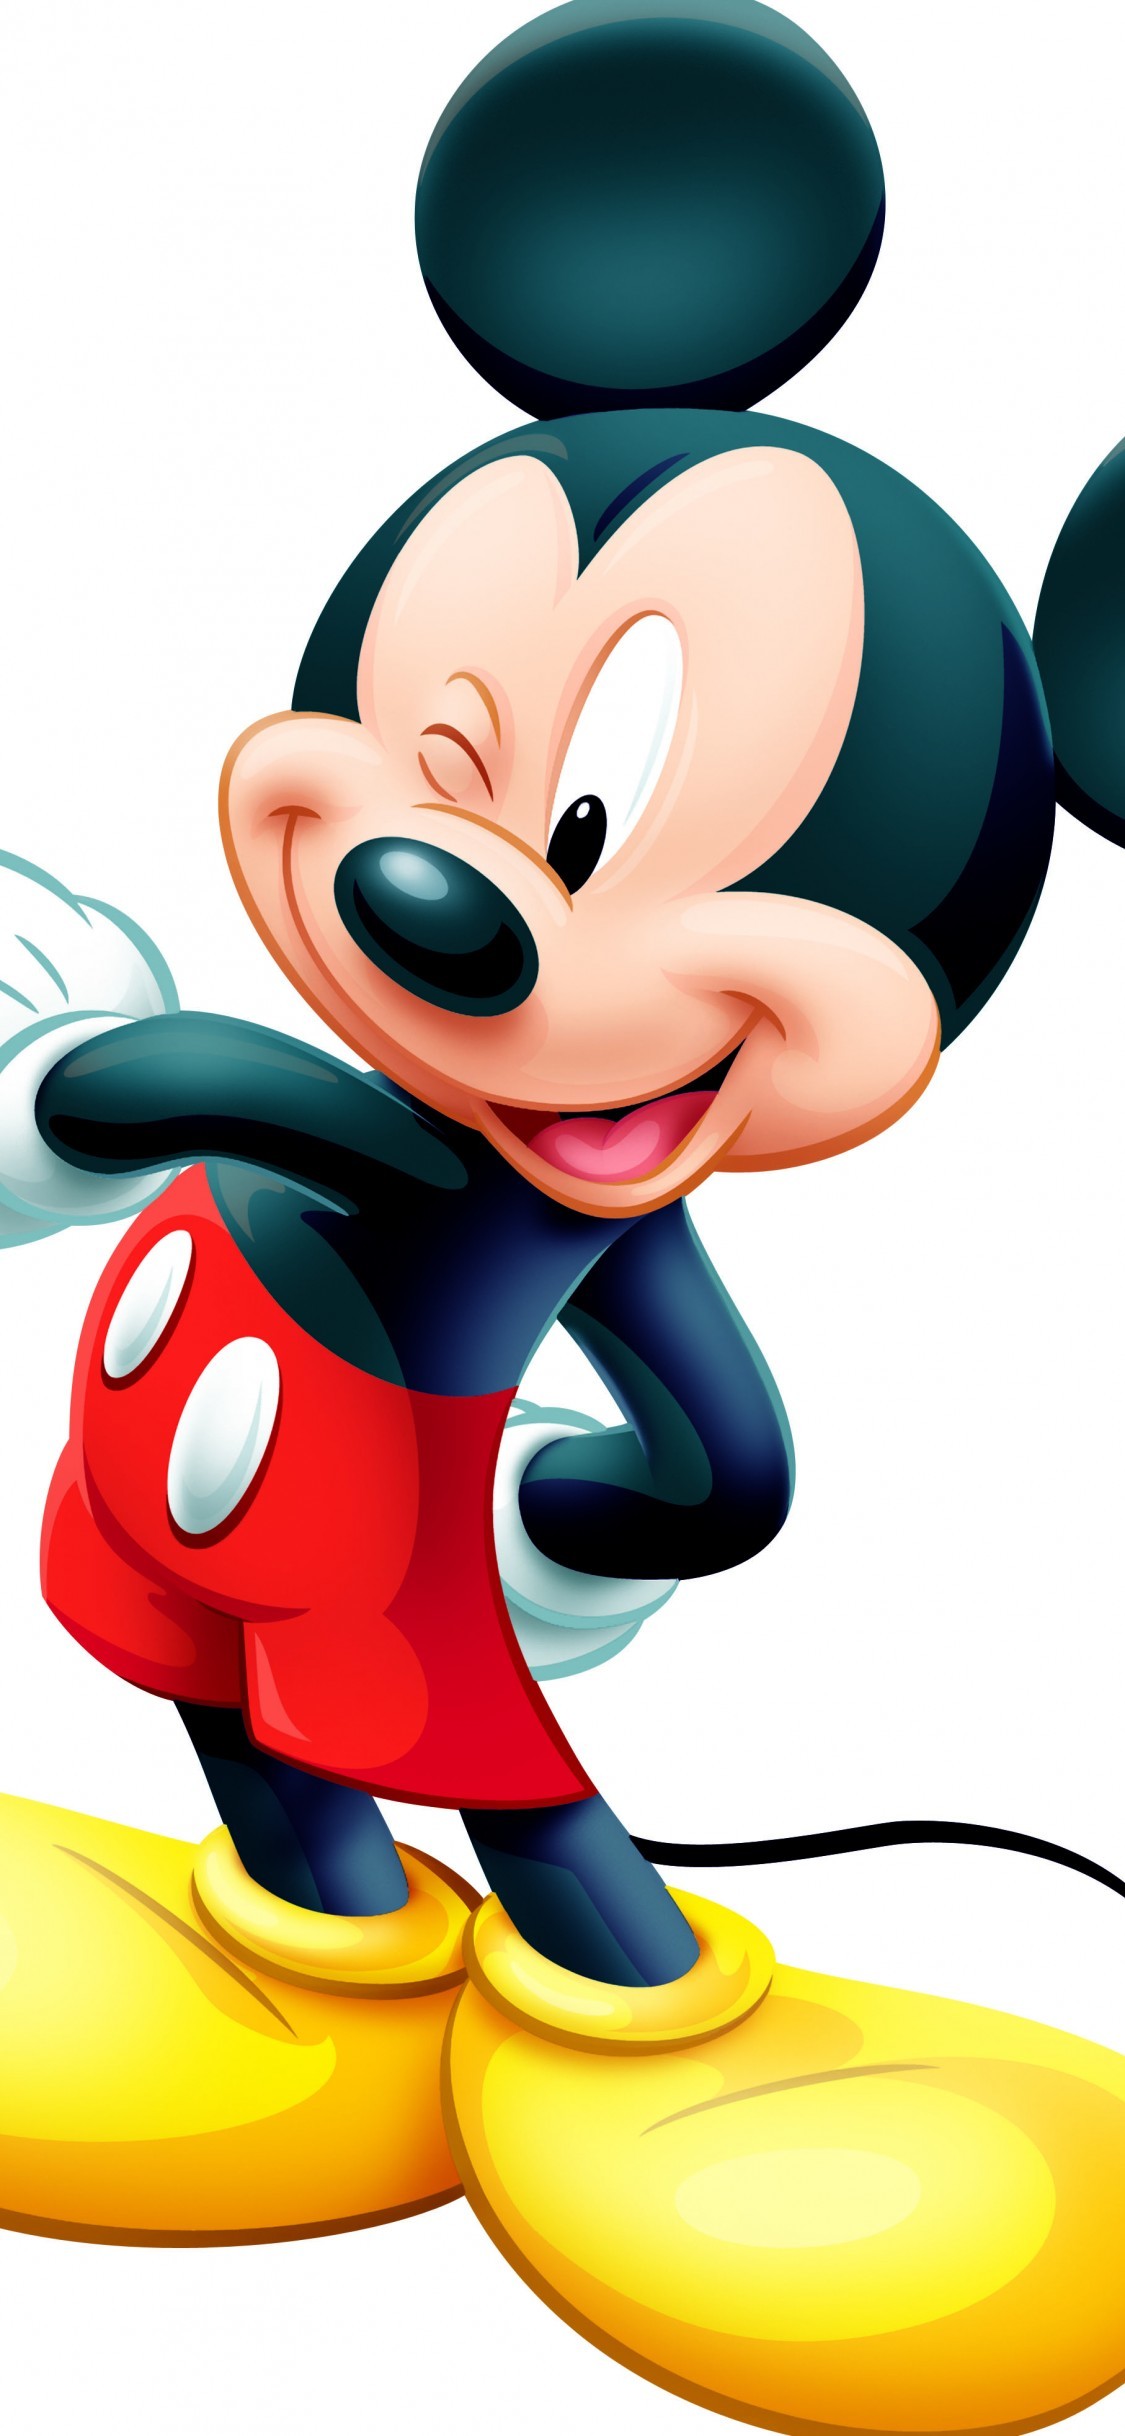 1125x2436 Download Mickey mouse art, Mickey mouse age wallpaper